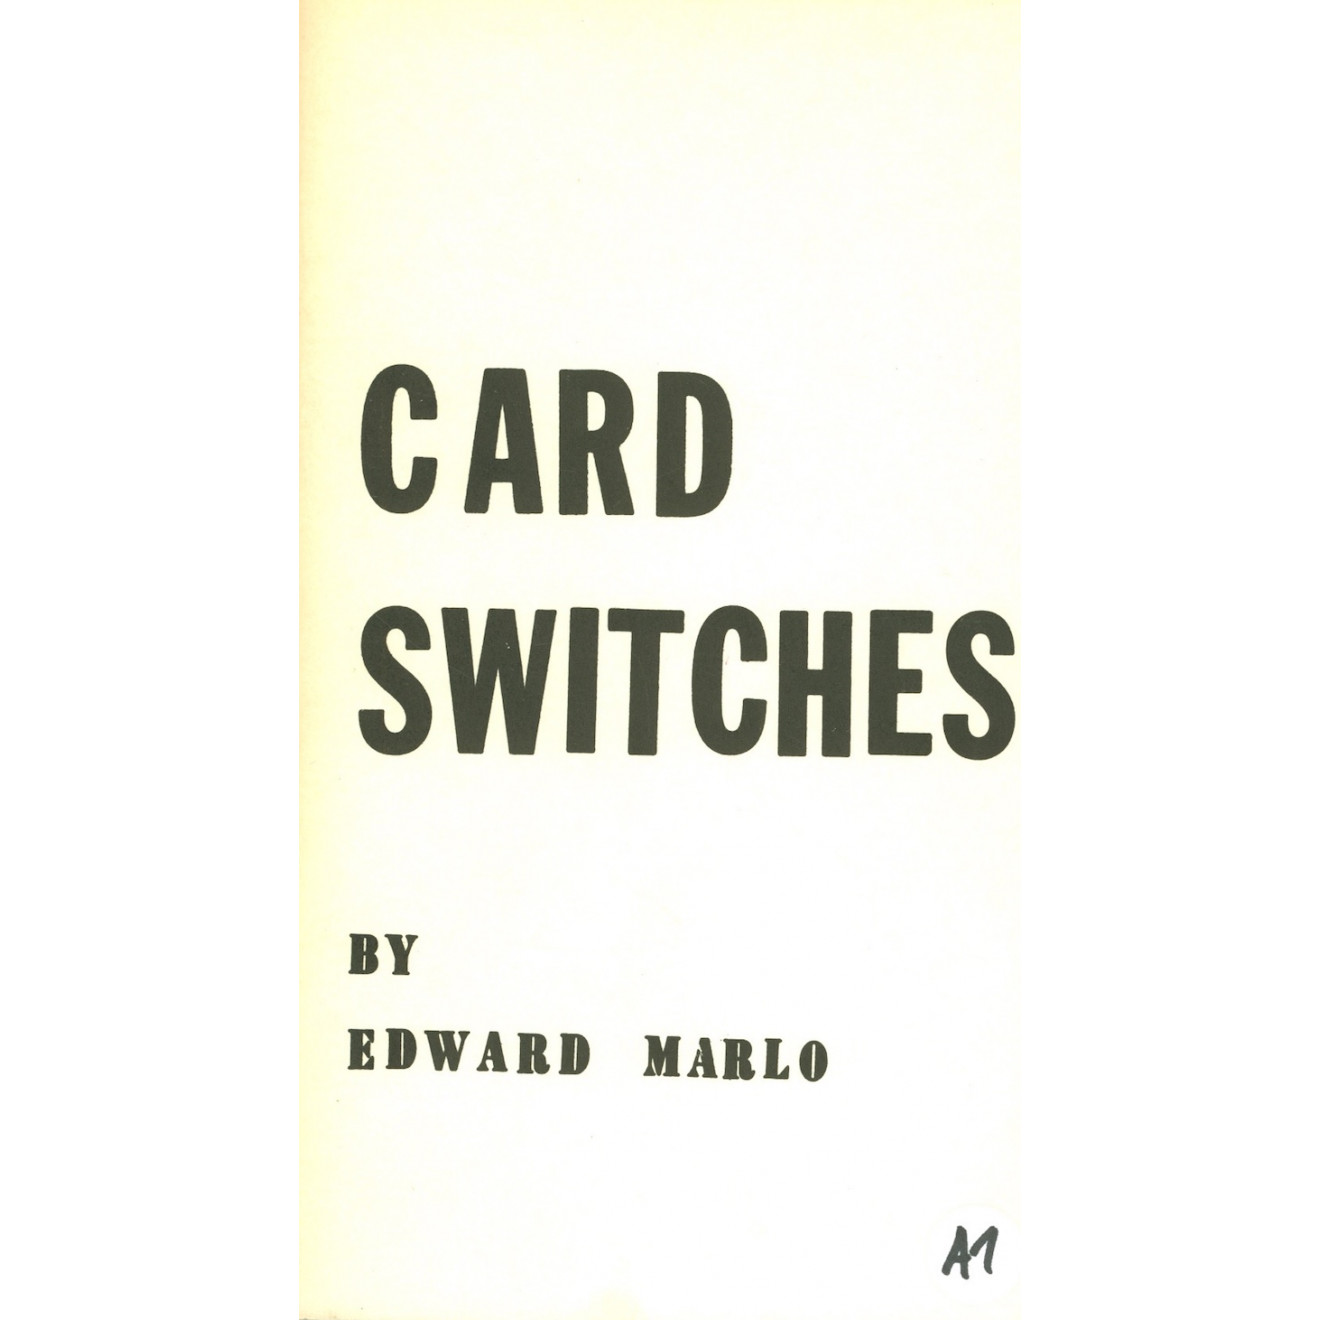 Card Switches